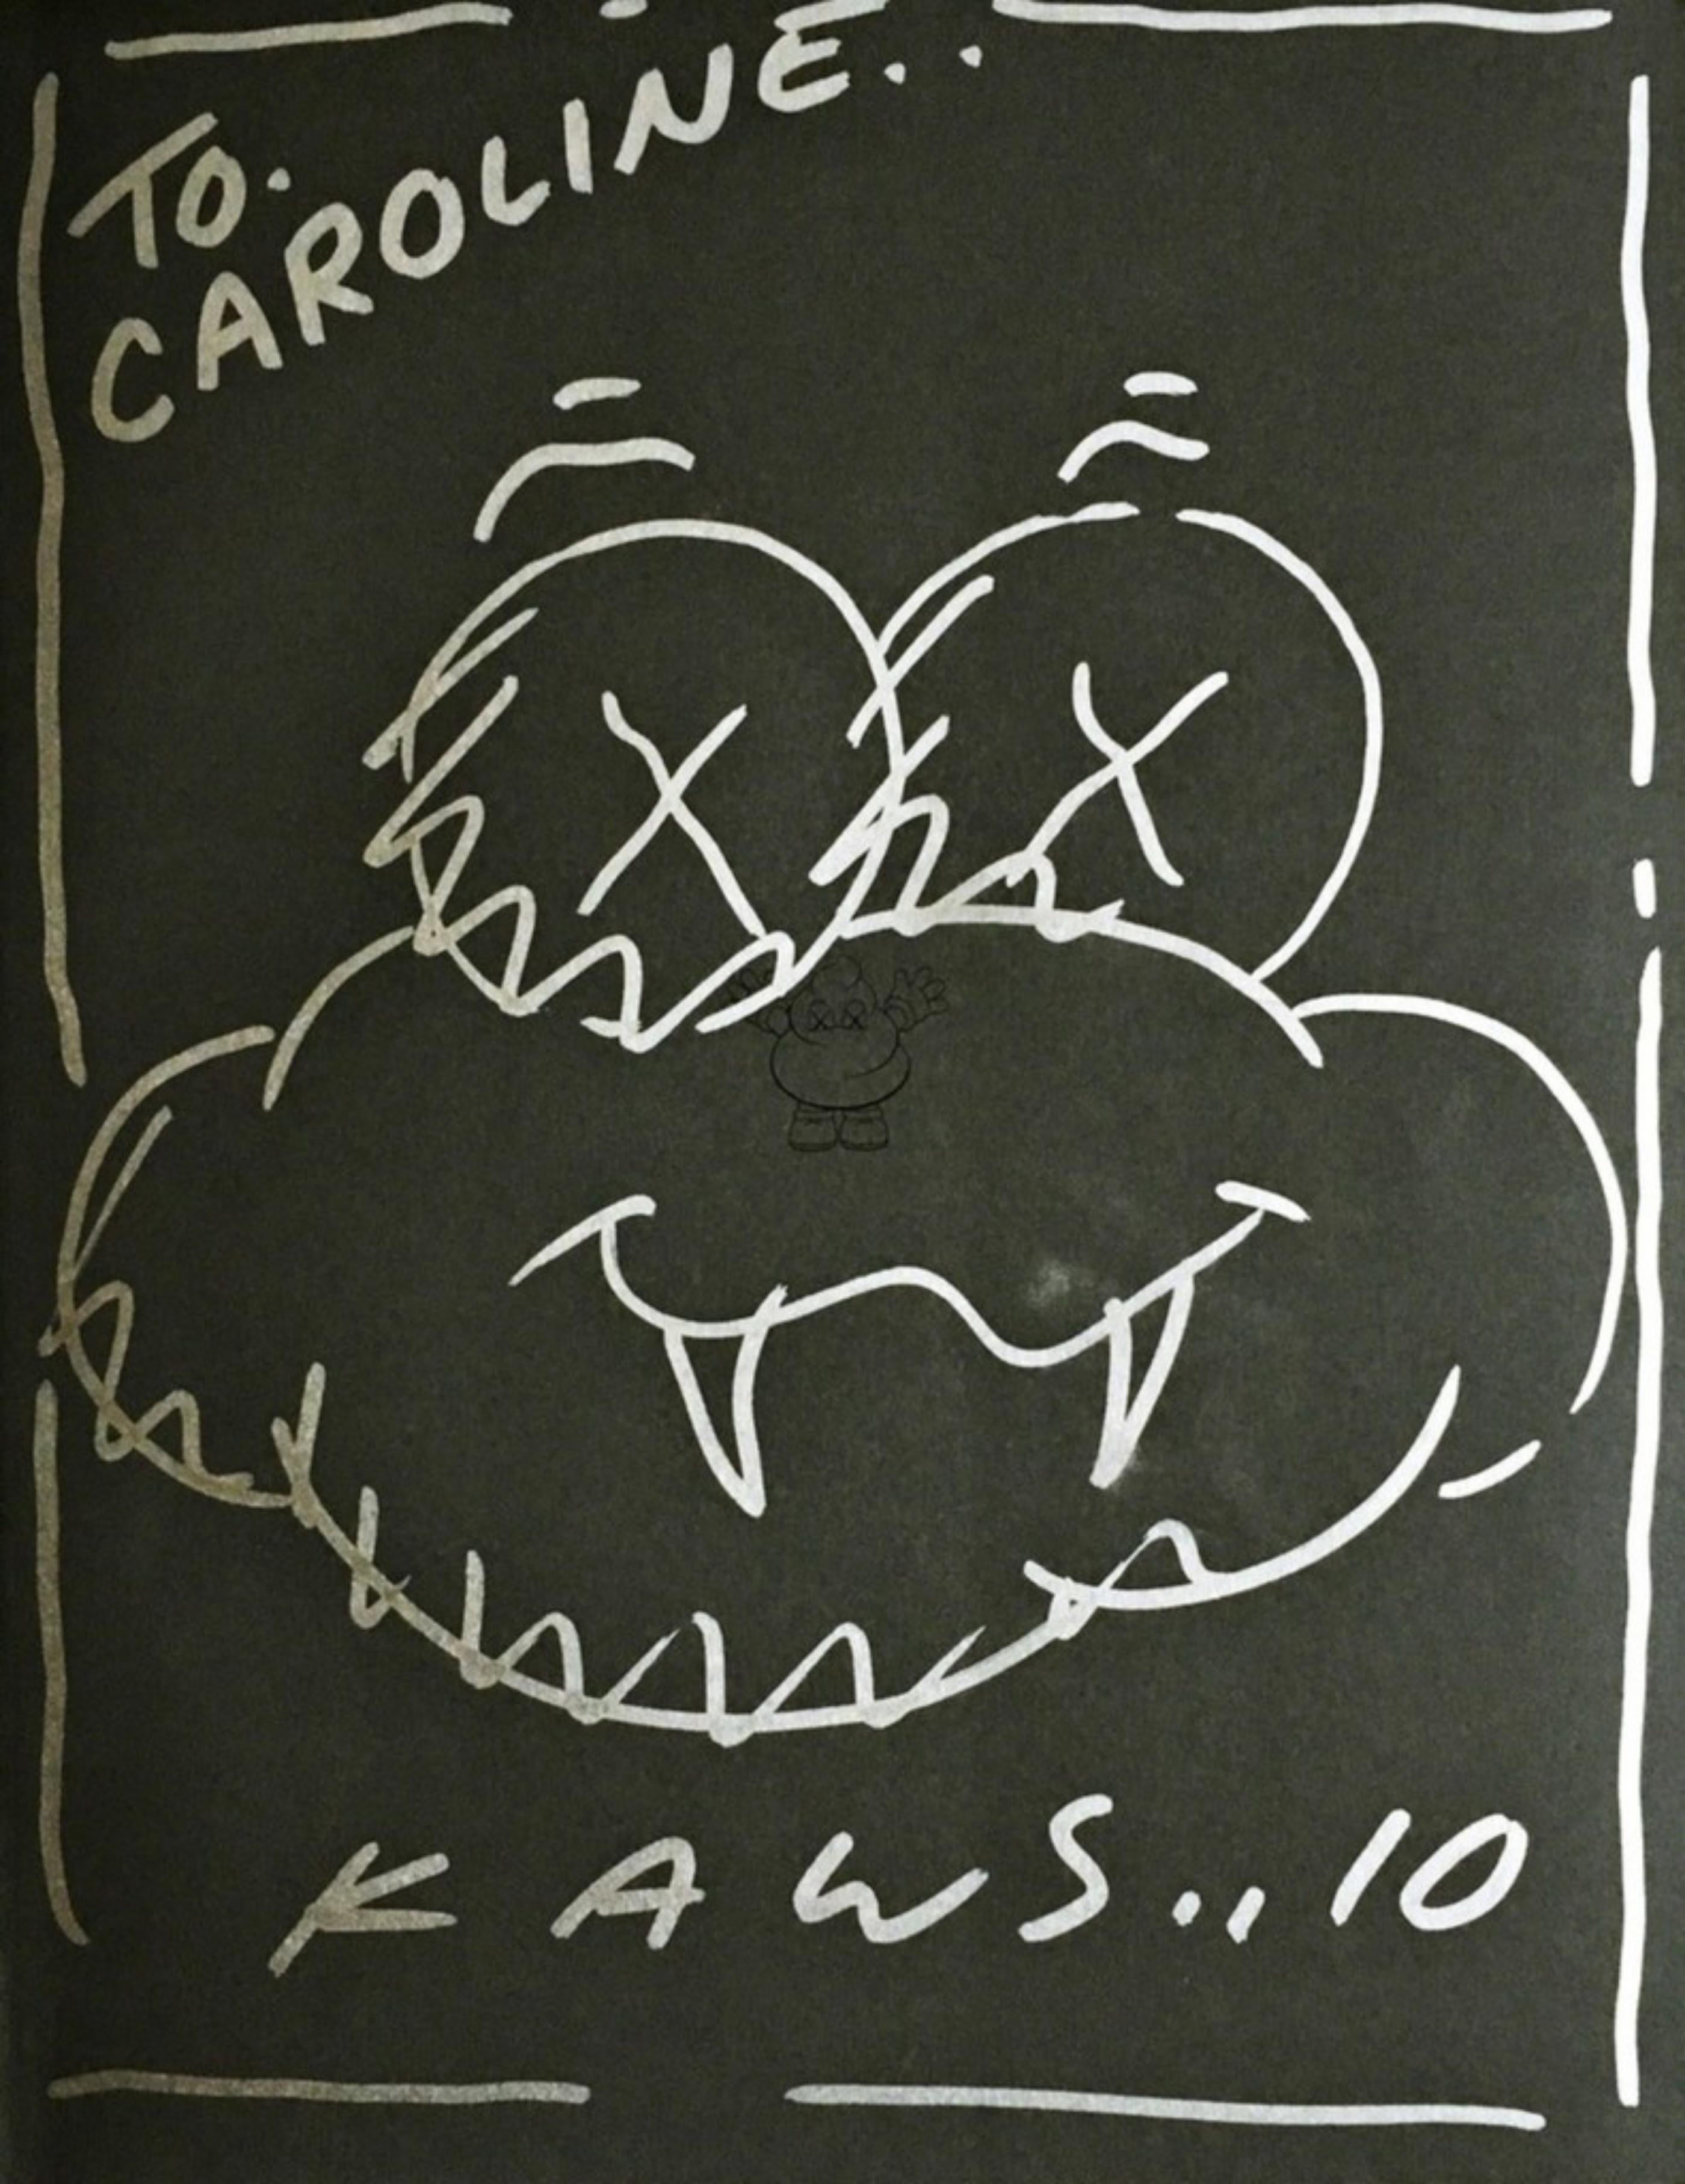 KAWS Figurative Art - Unique Cloud Drawing, hand signed, dated and inscribed to Caroline, in monograph